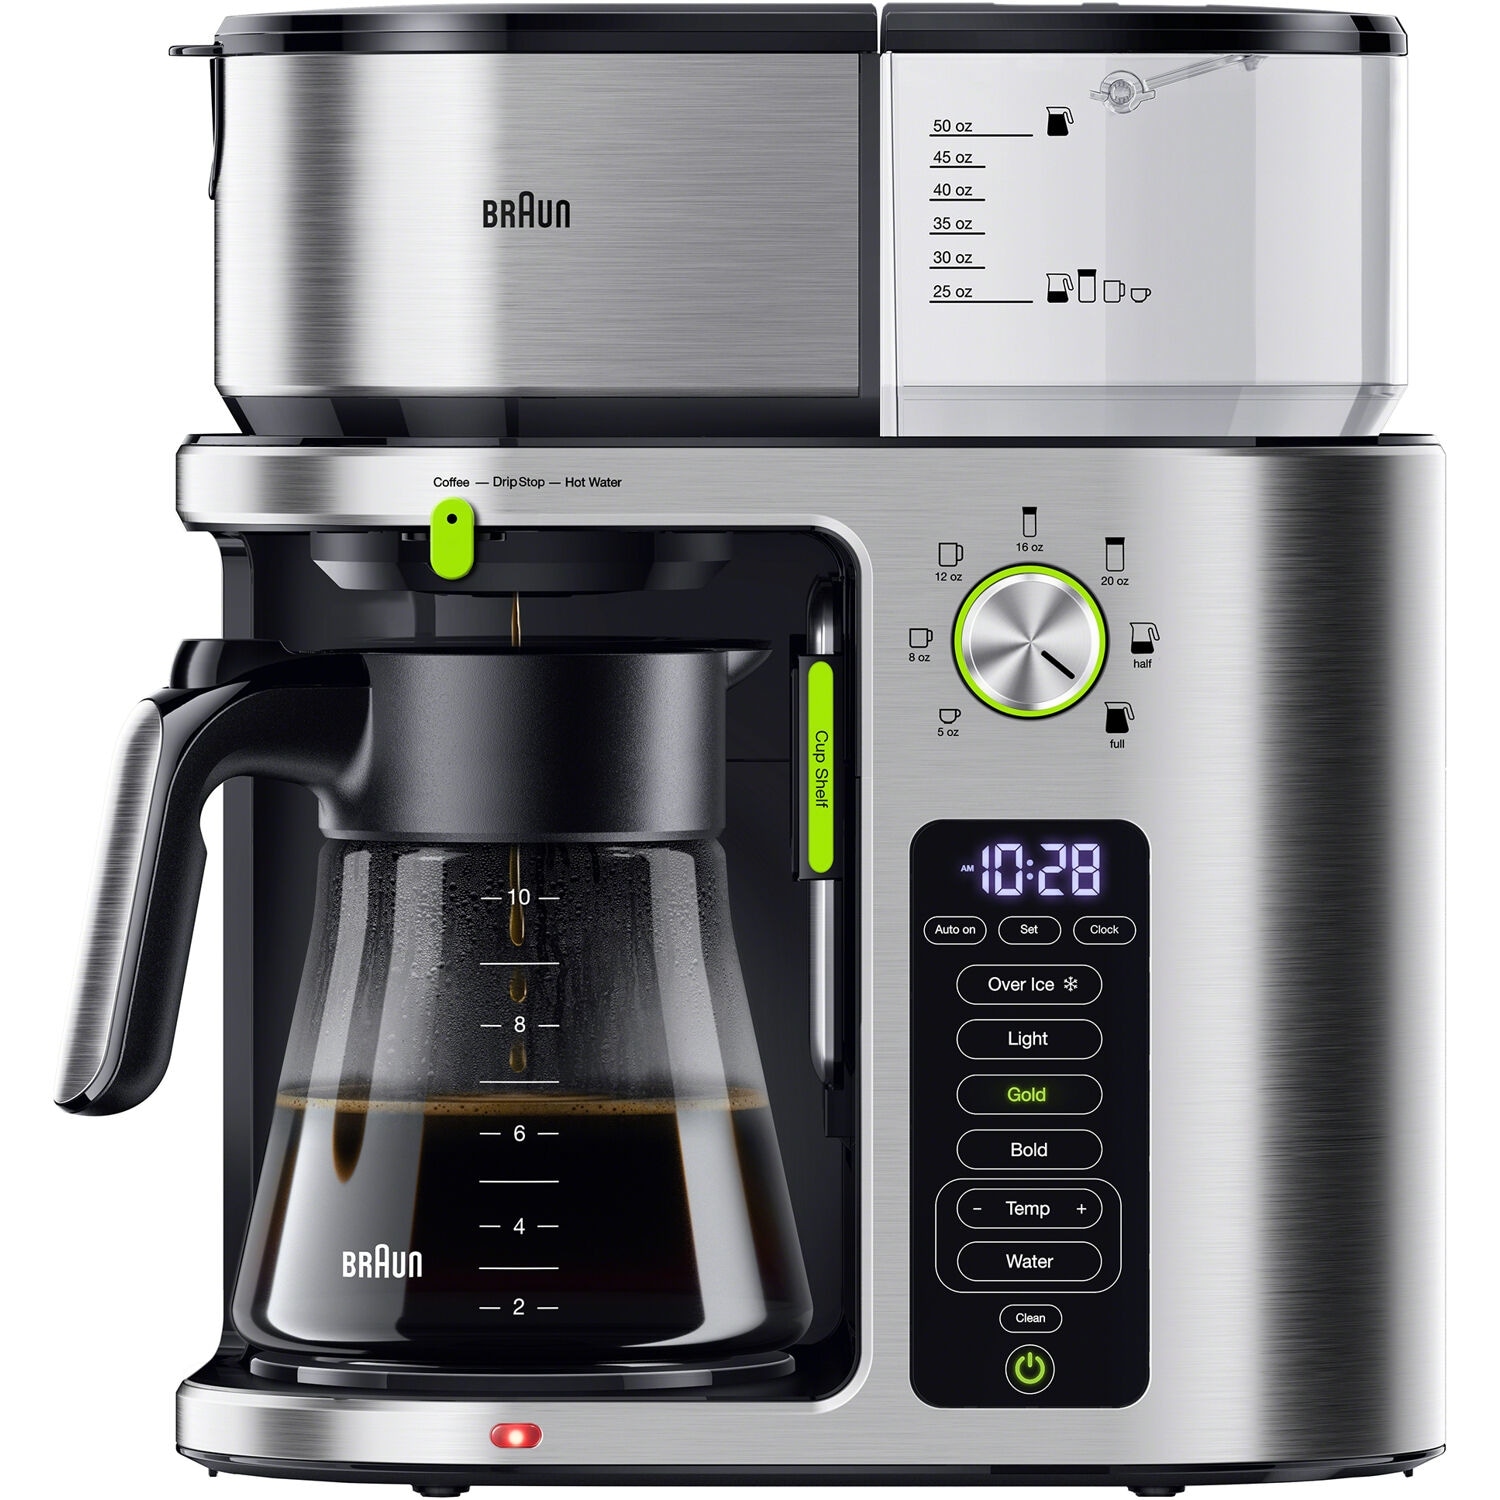 OXO Brew 8-Cup Coffee Maker is the most compact SCA-certified brewer